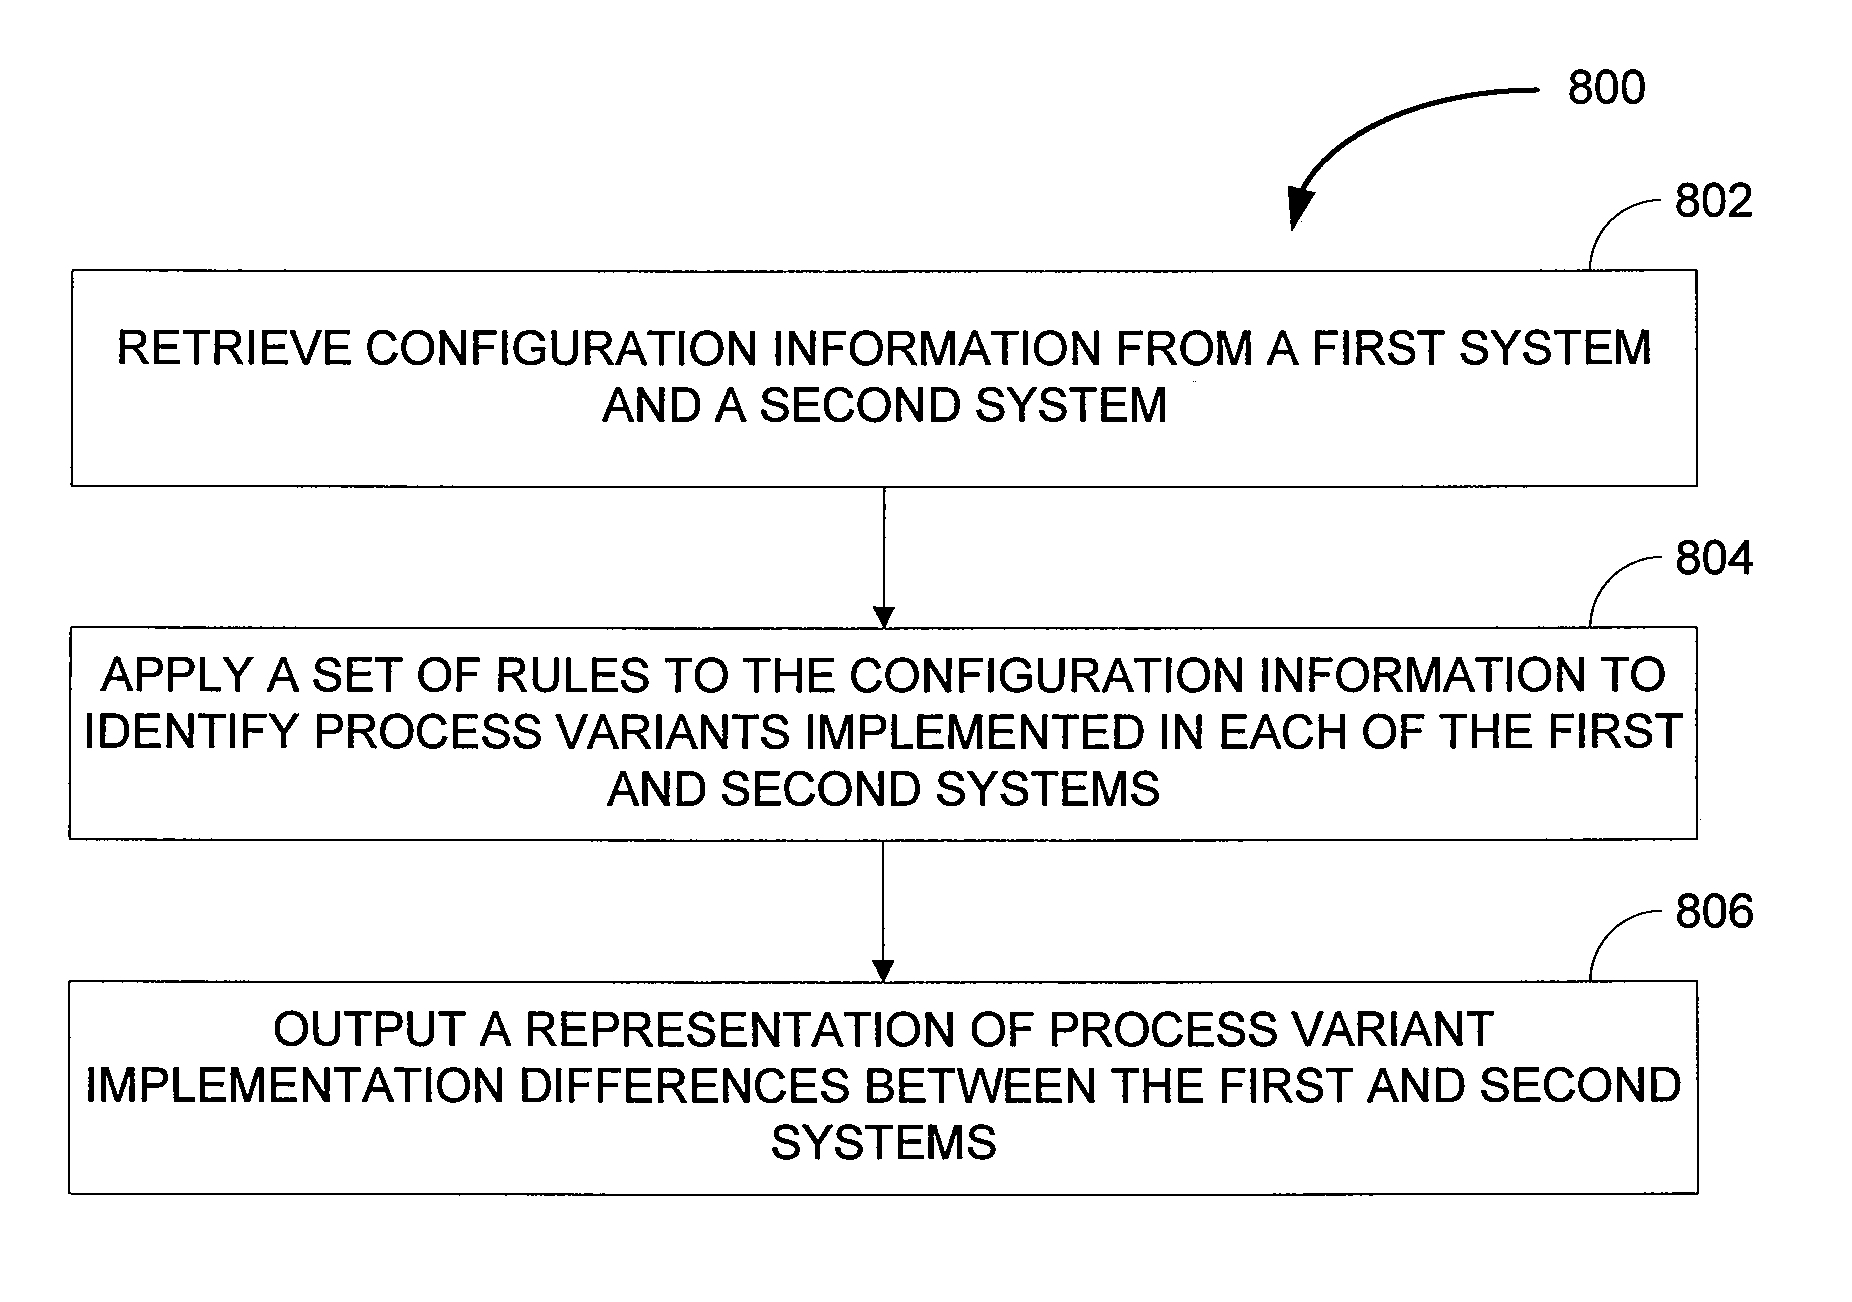 System configuration comparison to identify process variation